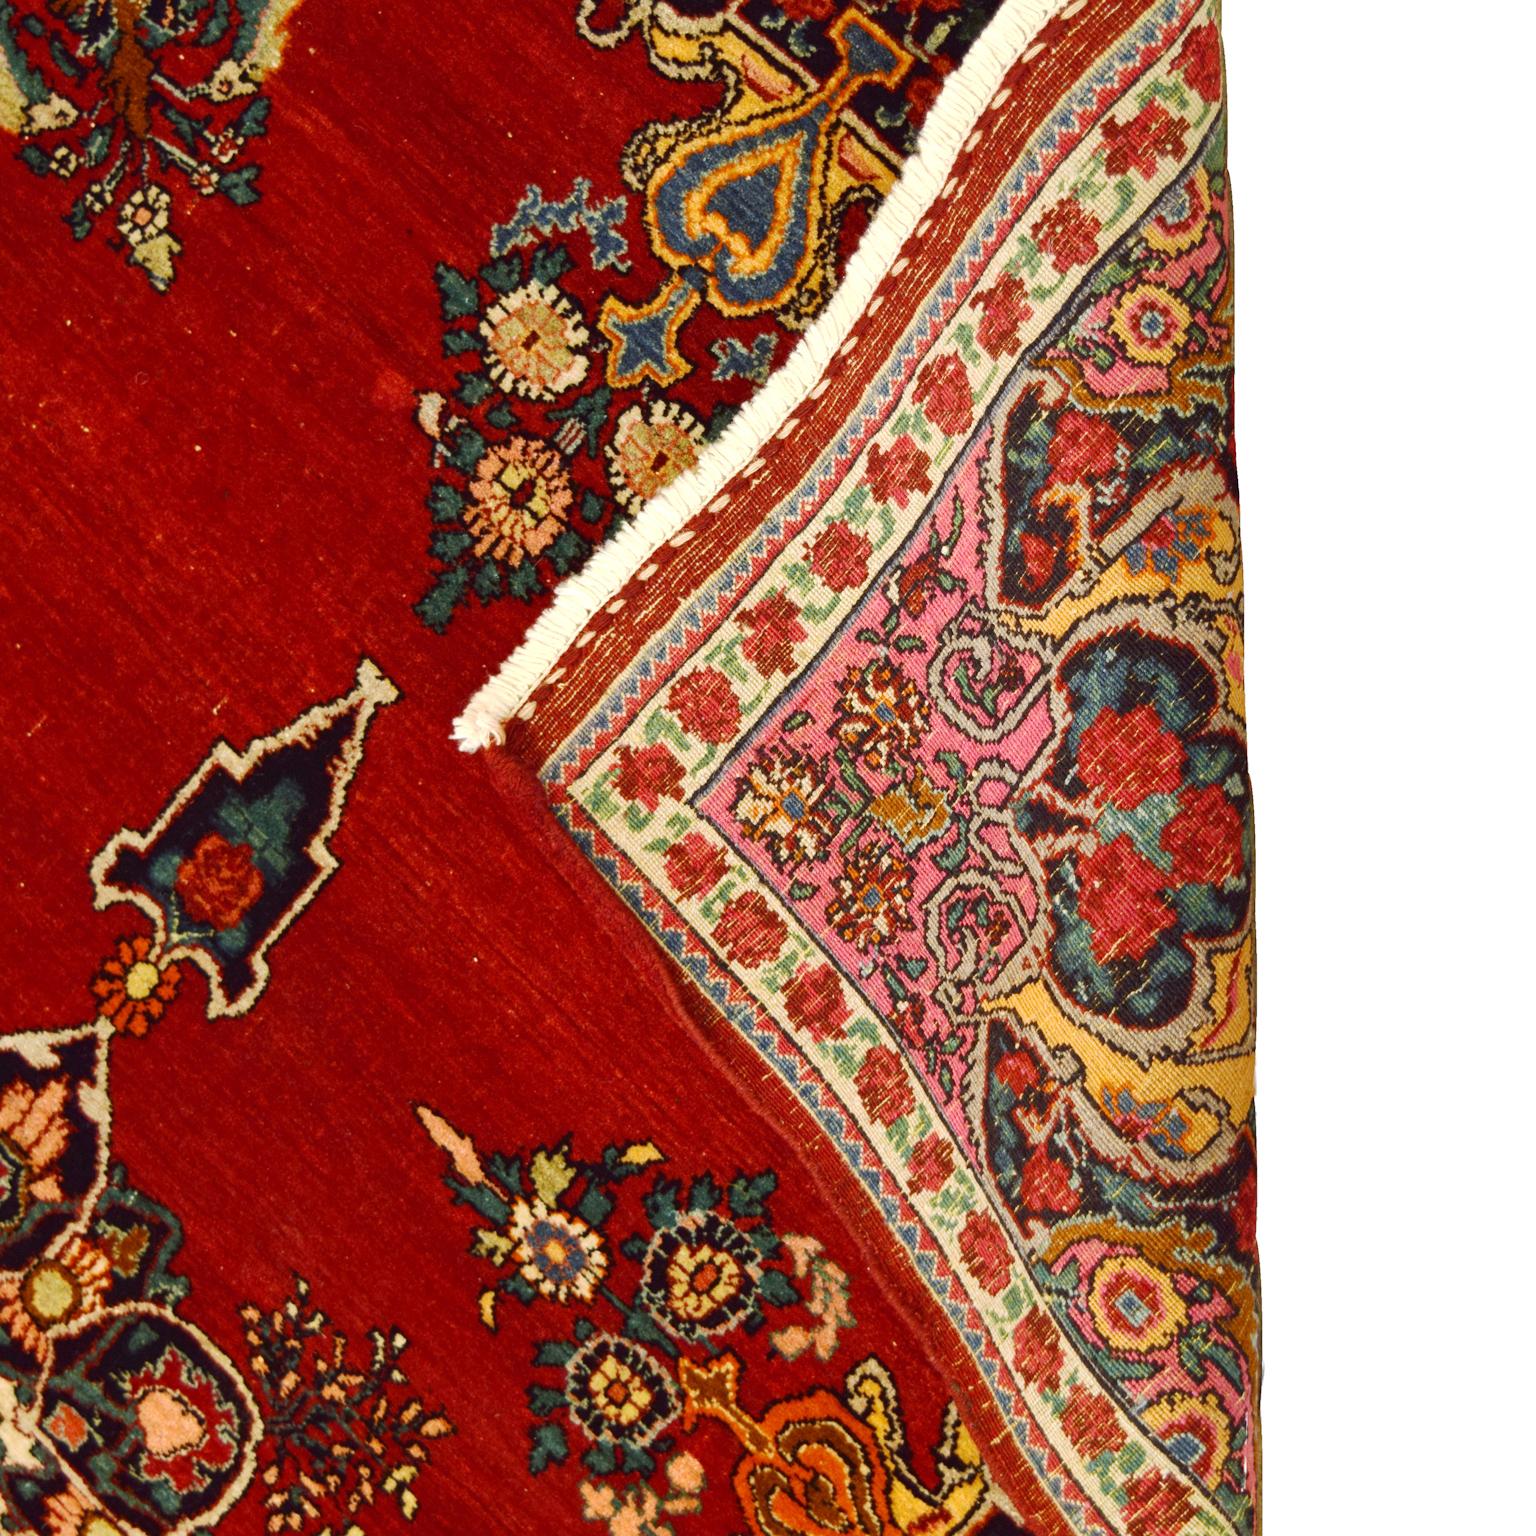 Wool Antique Formal 1900s Persian Bidjar Rug in Red, Blue, and Gold, 4' x 6' For Sale